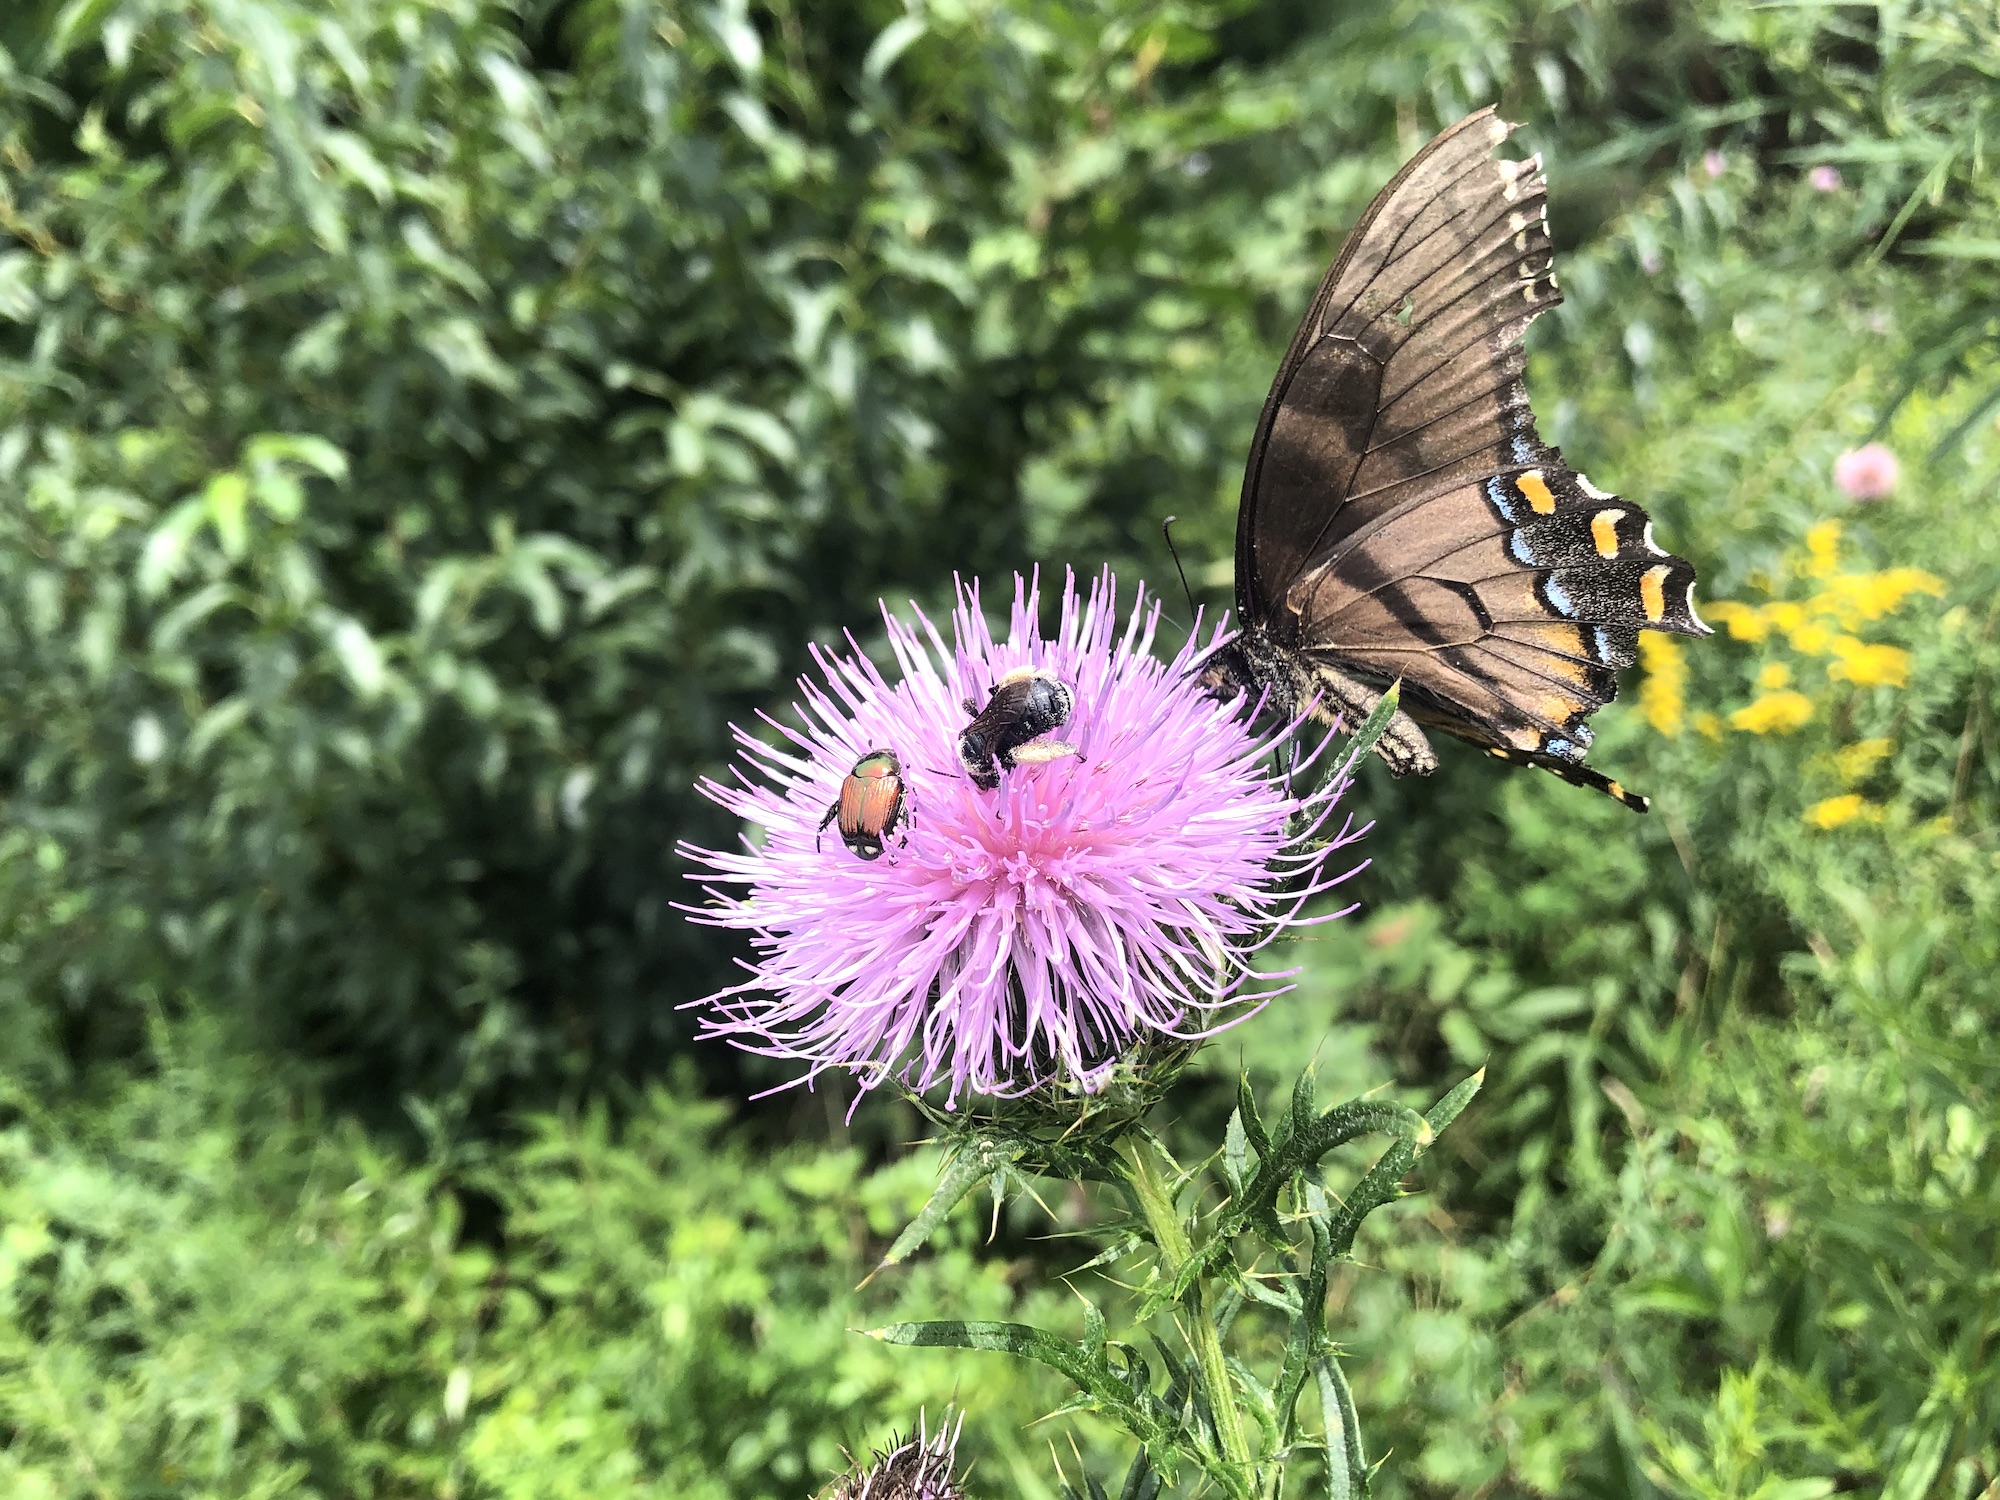 Female Eastern Tiger Swallowtail butterfly on Field Thistle in the Prairie Moraine Dog Park in Verona, Wisconsin on August 15, 2022.